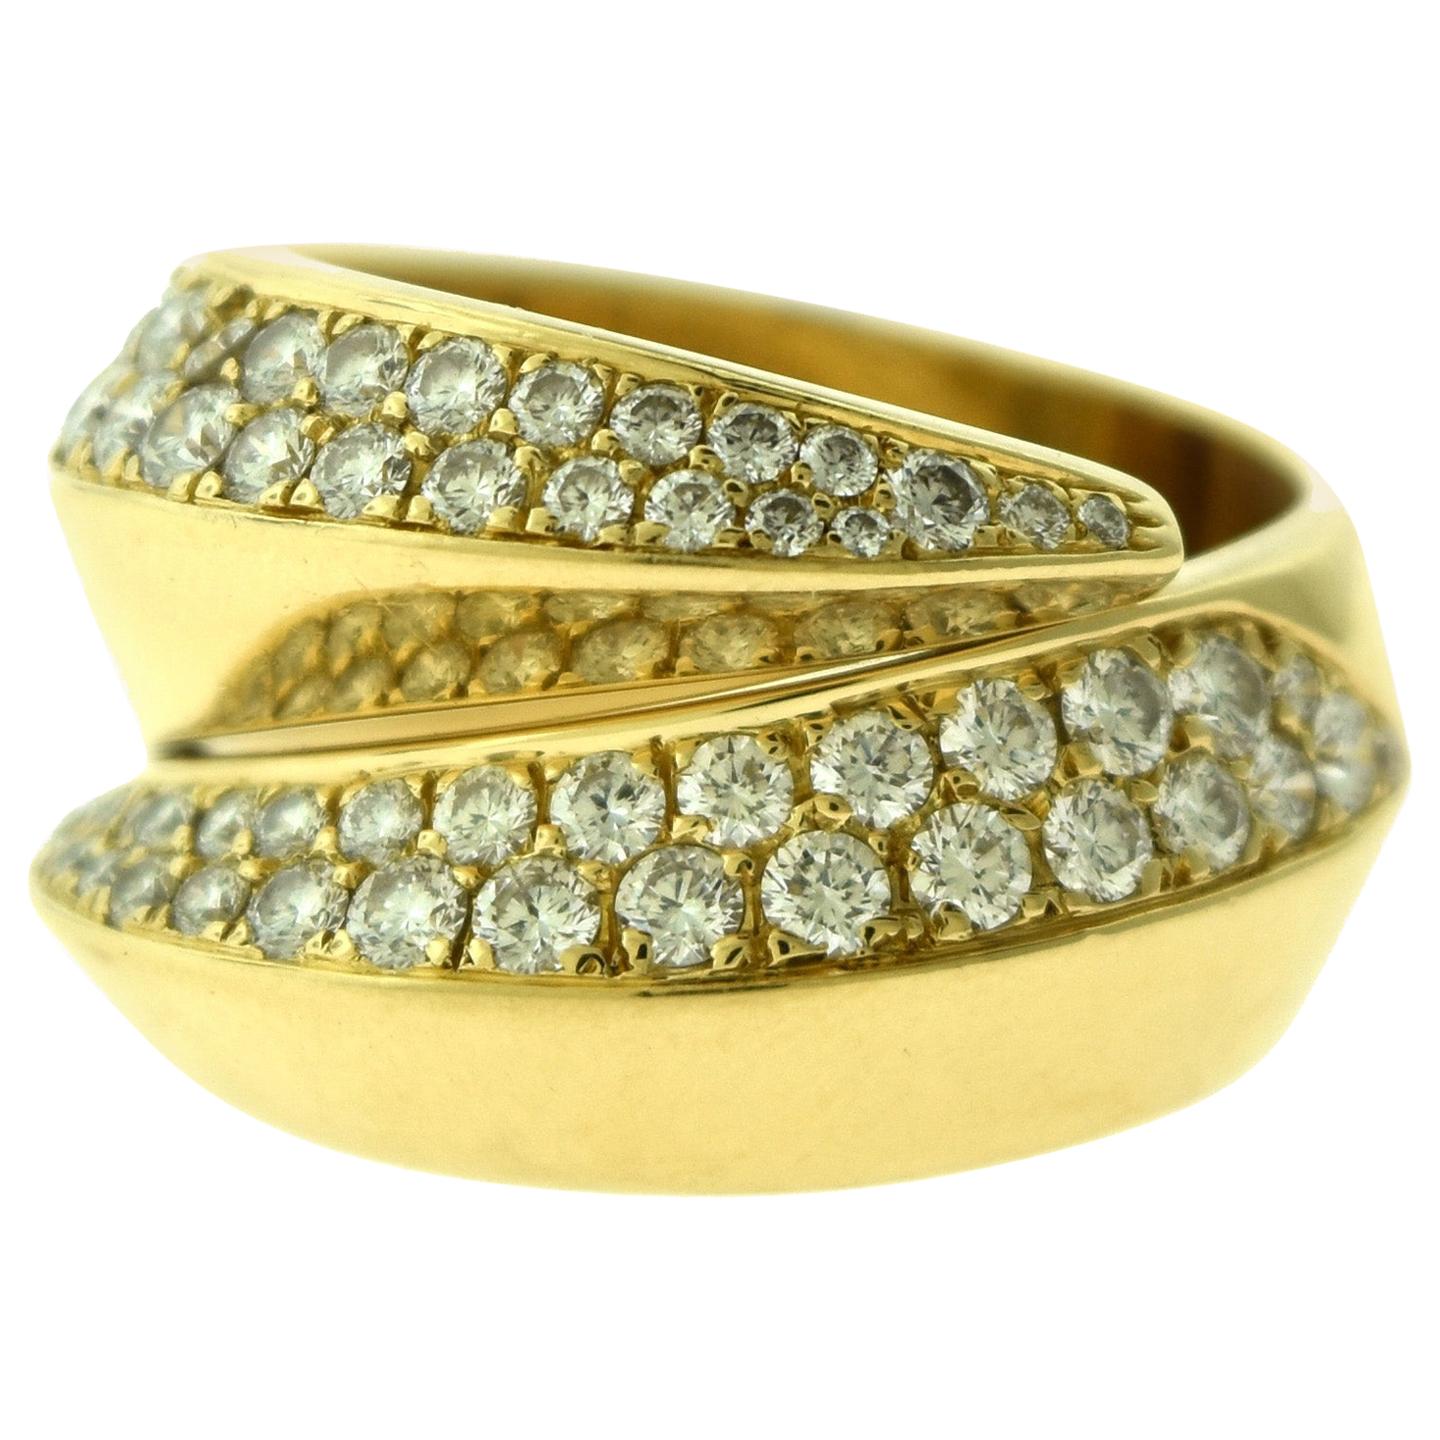 Cartier Coup d’Eclat Double Swirl Diamond Ring in Yellow Gold